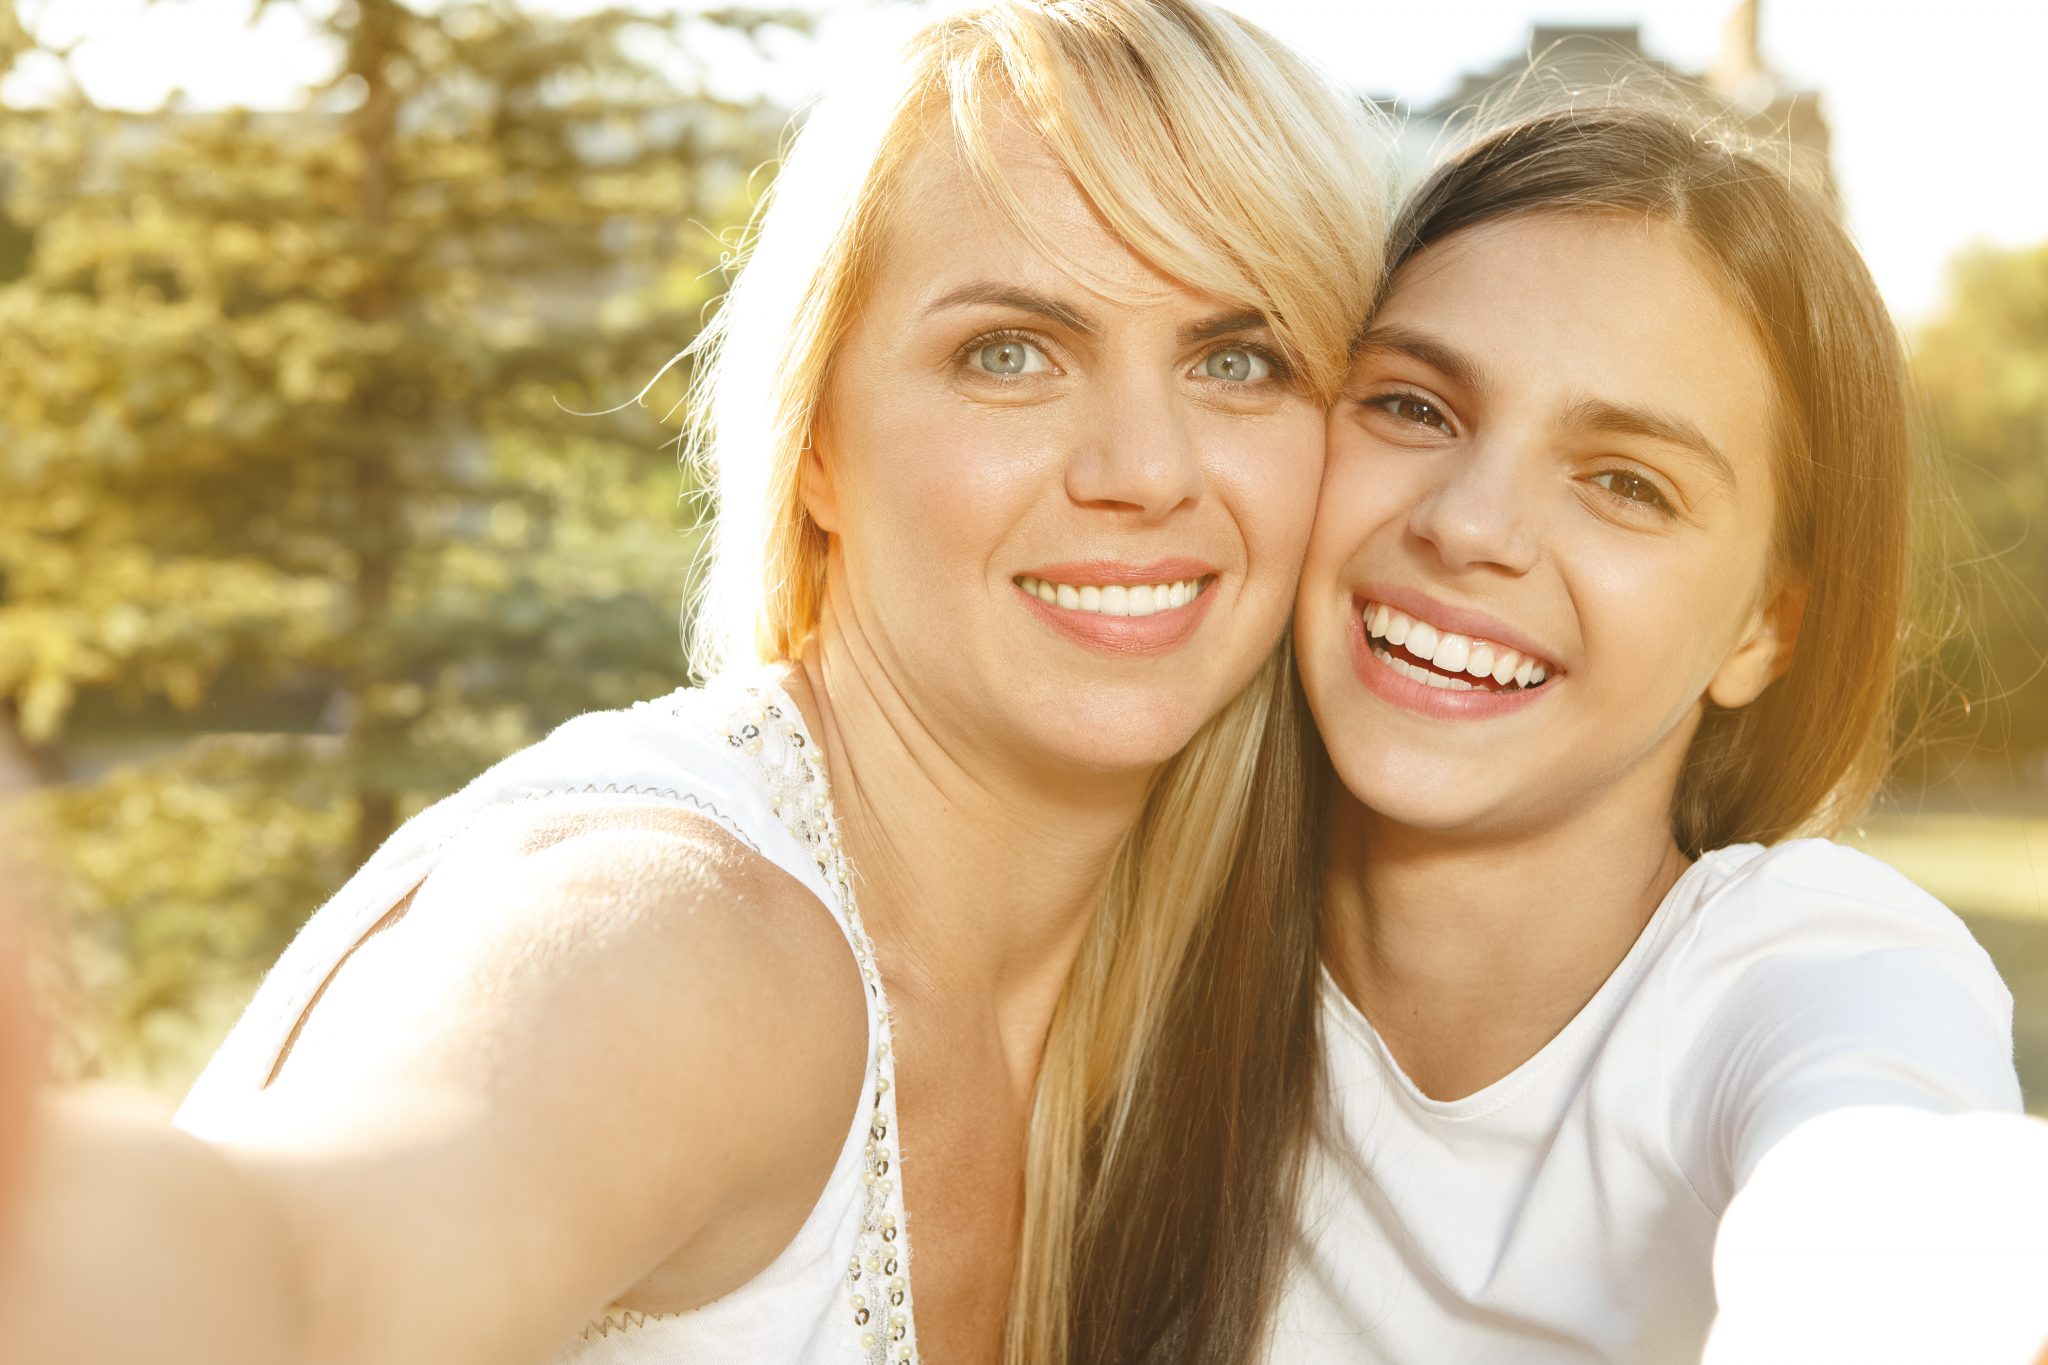 Because orthodontic work frequently occurs during a patient’s tween or teen years